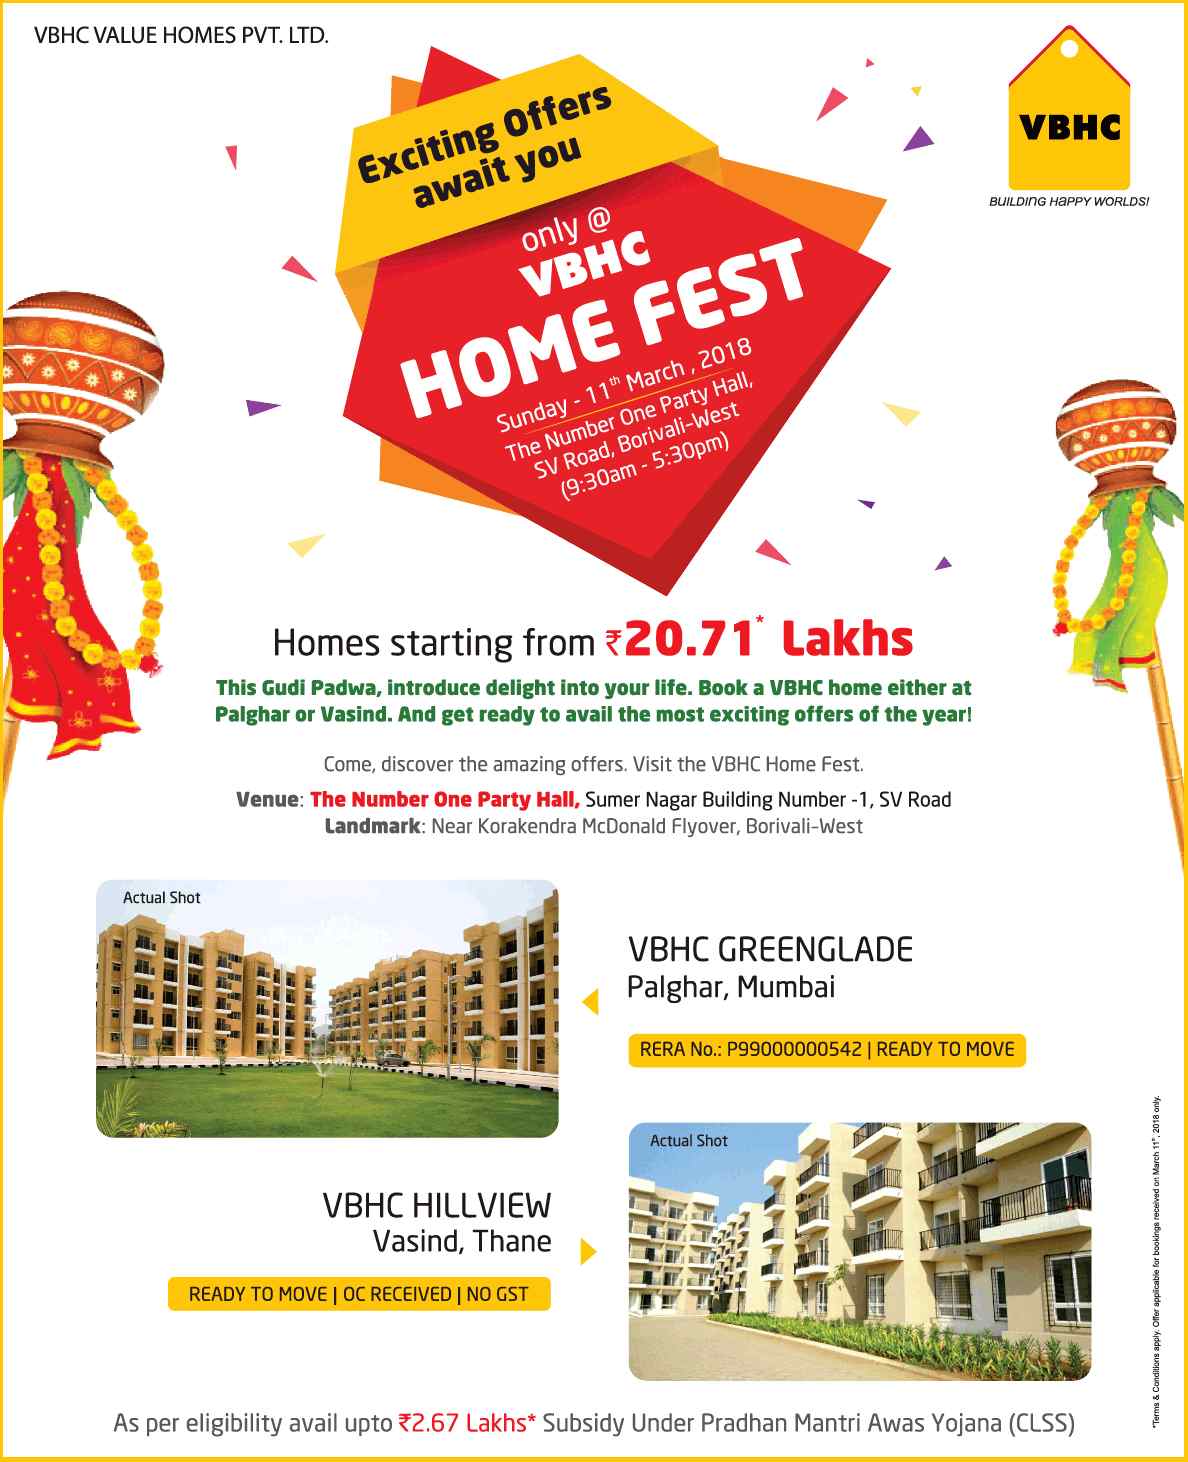 Invest in VBHC Homes starting at Rs. 20.71 Lakhs in Mumbai Update